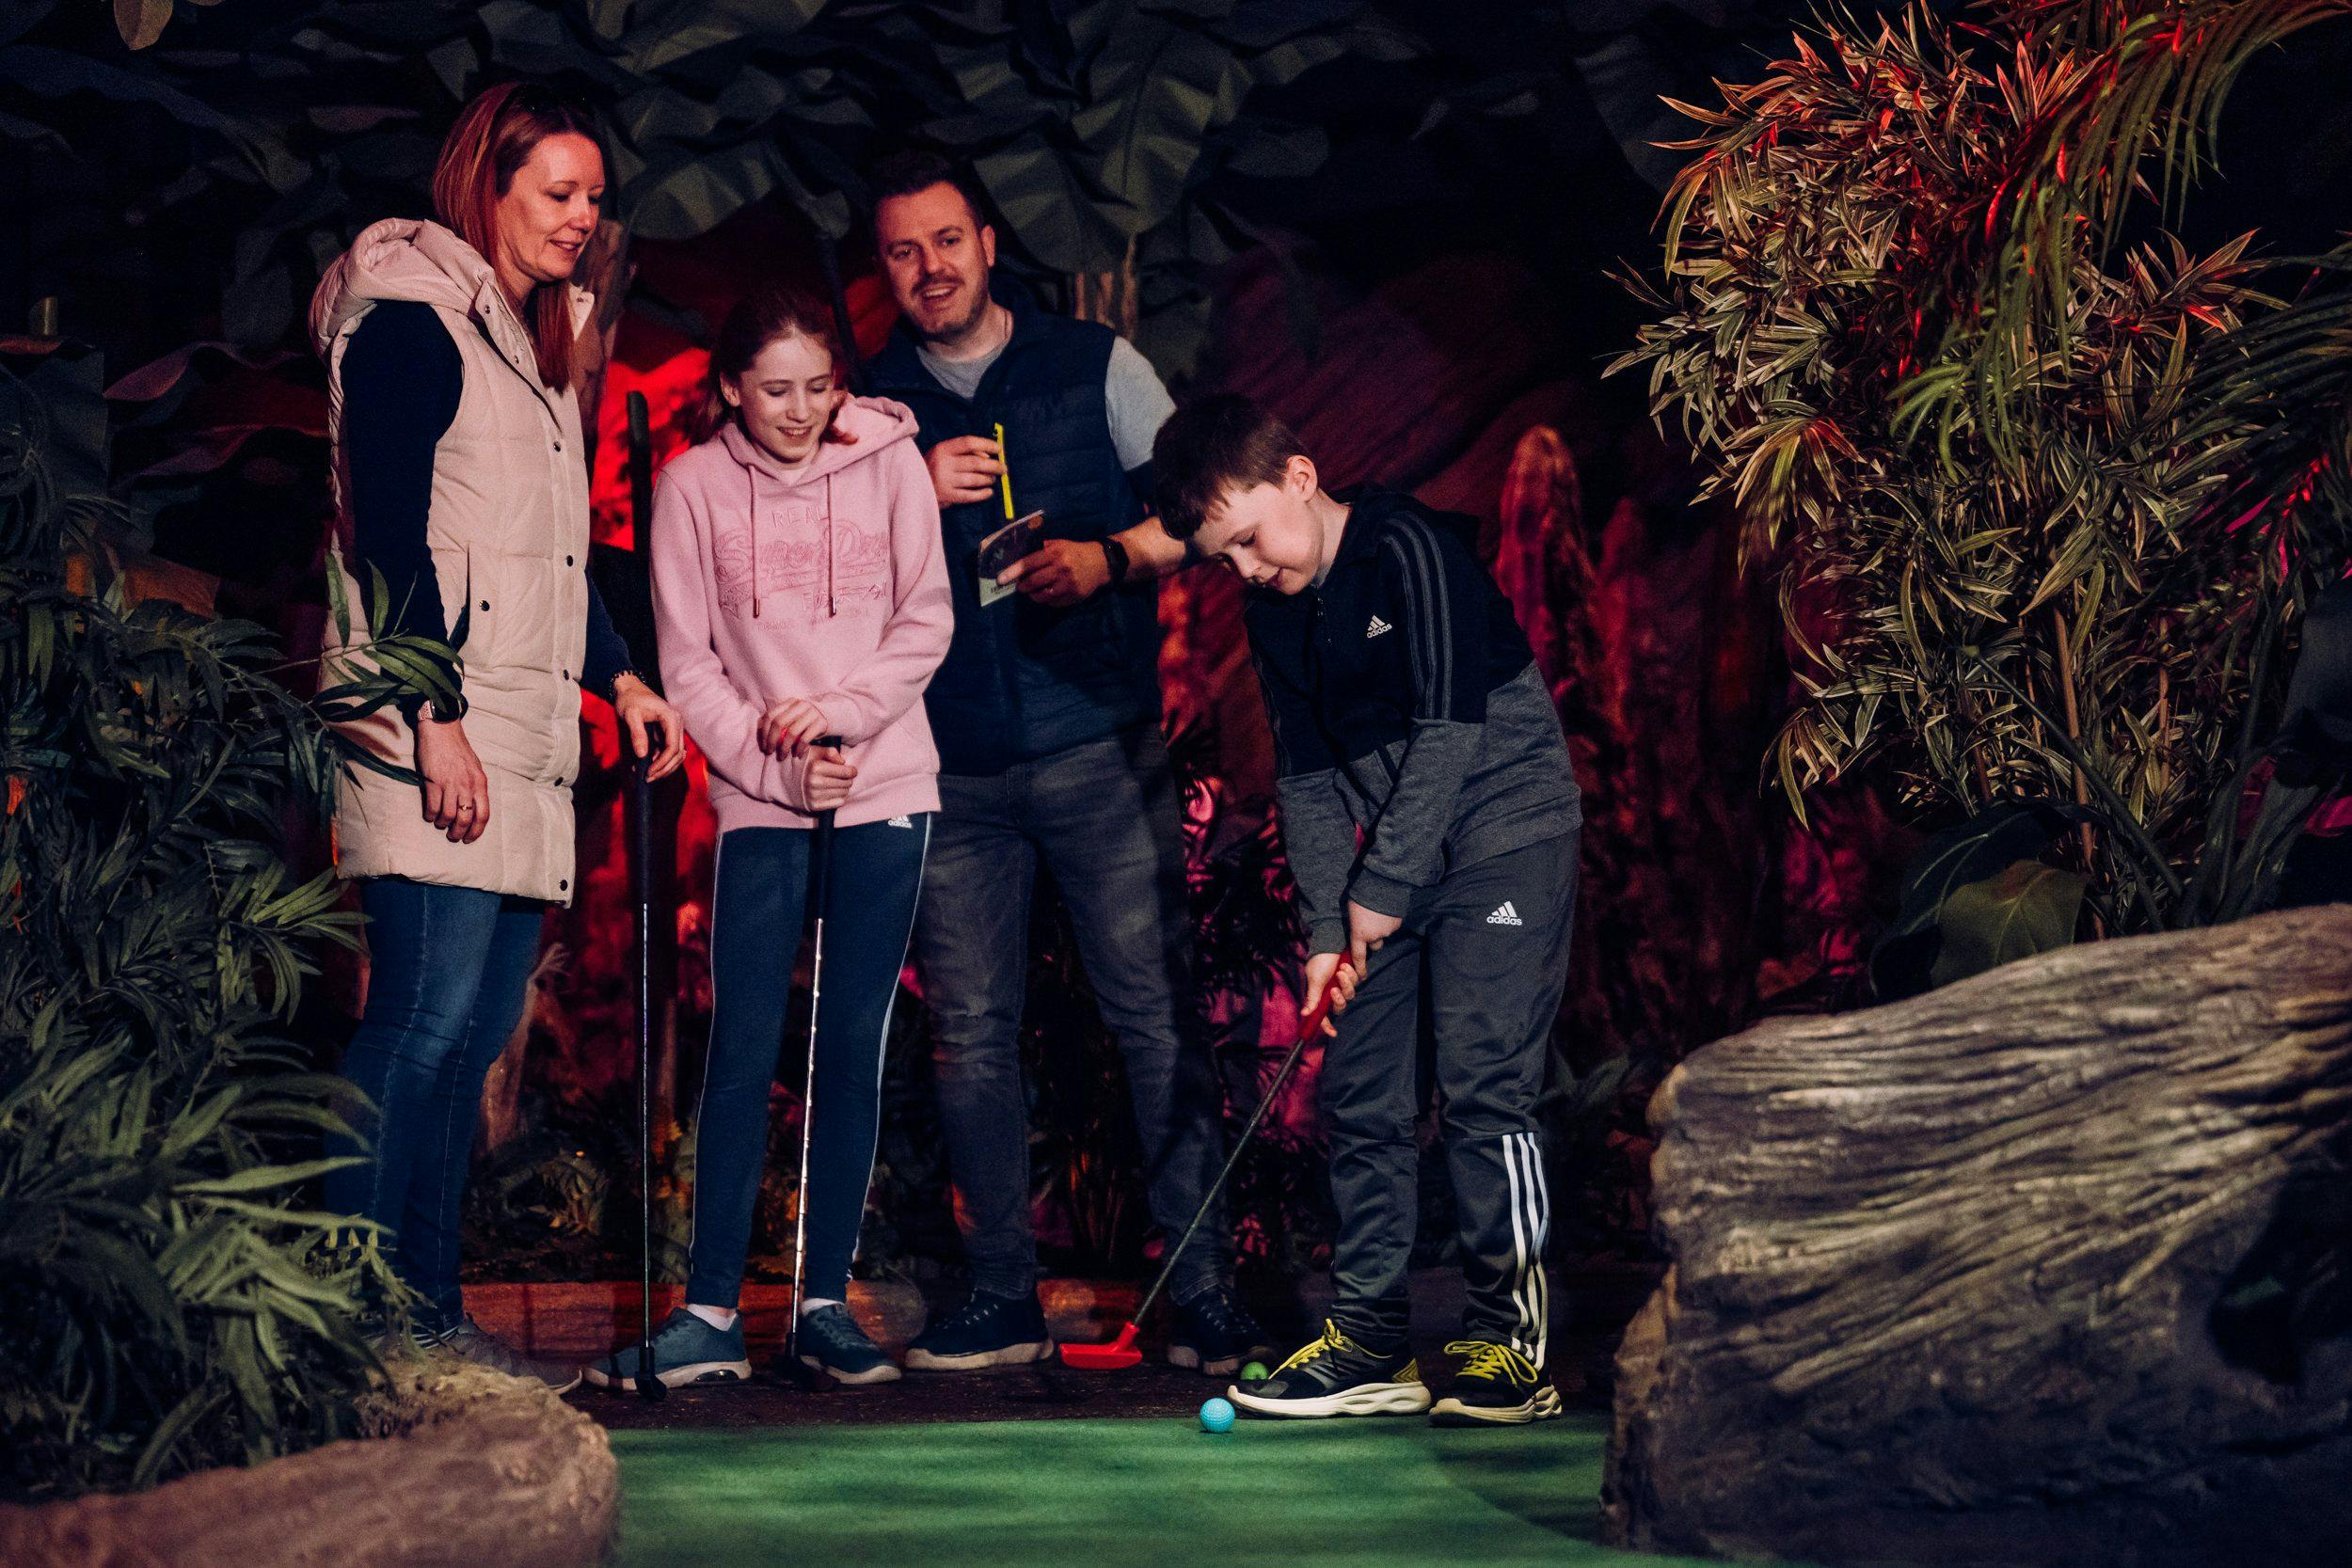 A family of 4 playing mini golf.